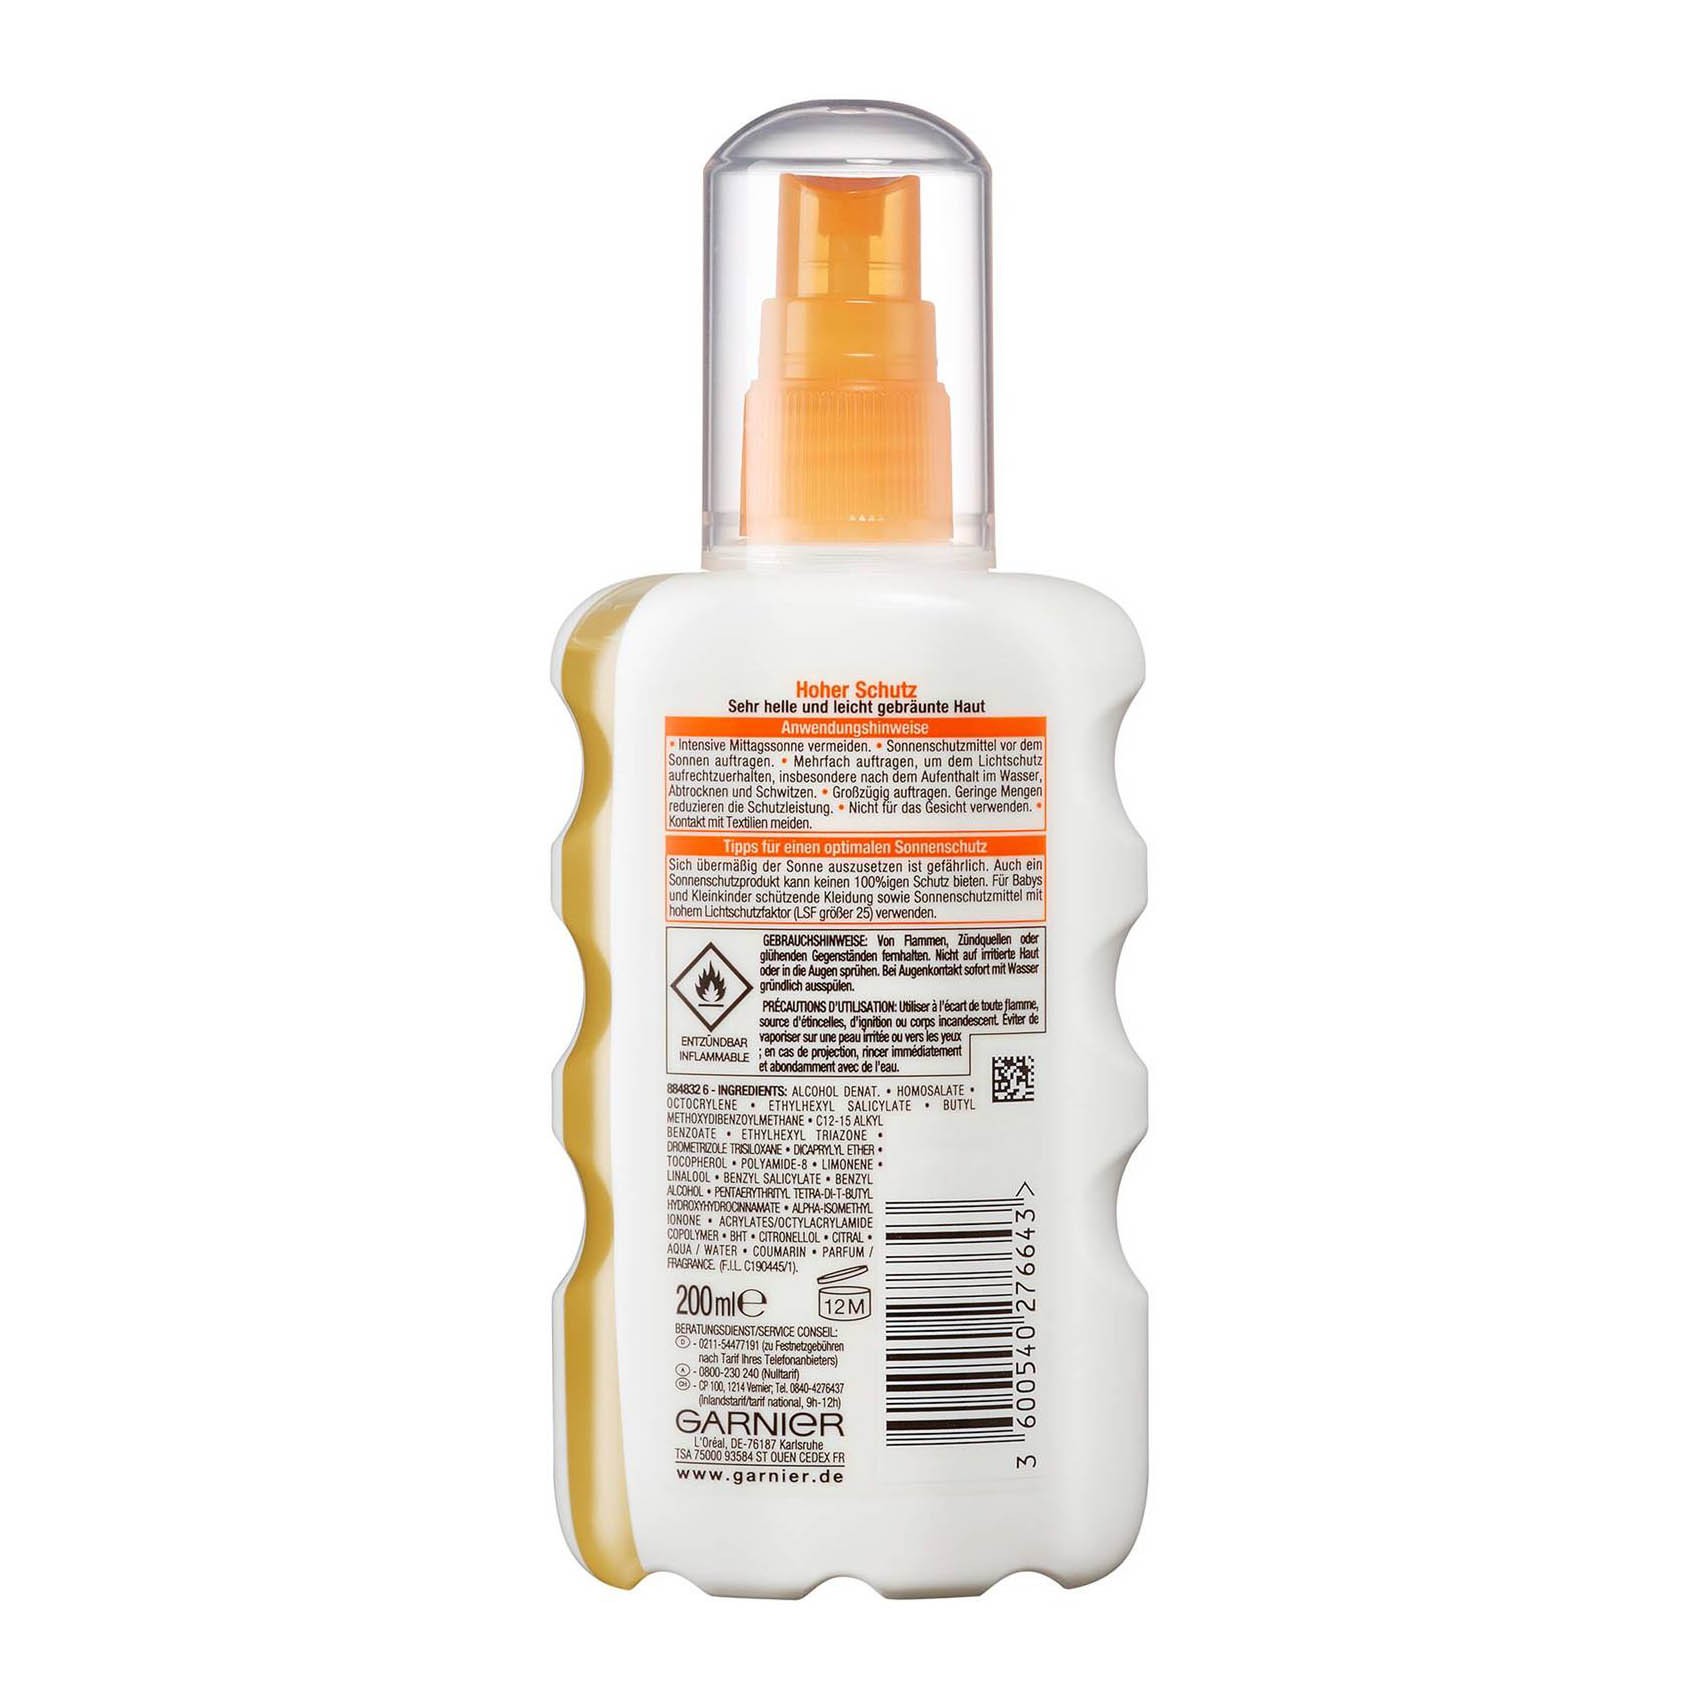 Sun Protection Spray - Ambre Solaire - Clear Protect SPF 30